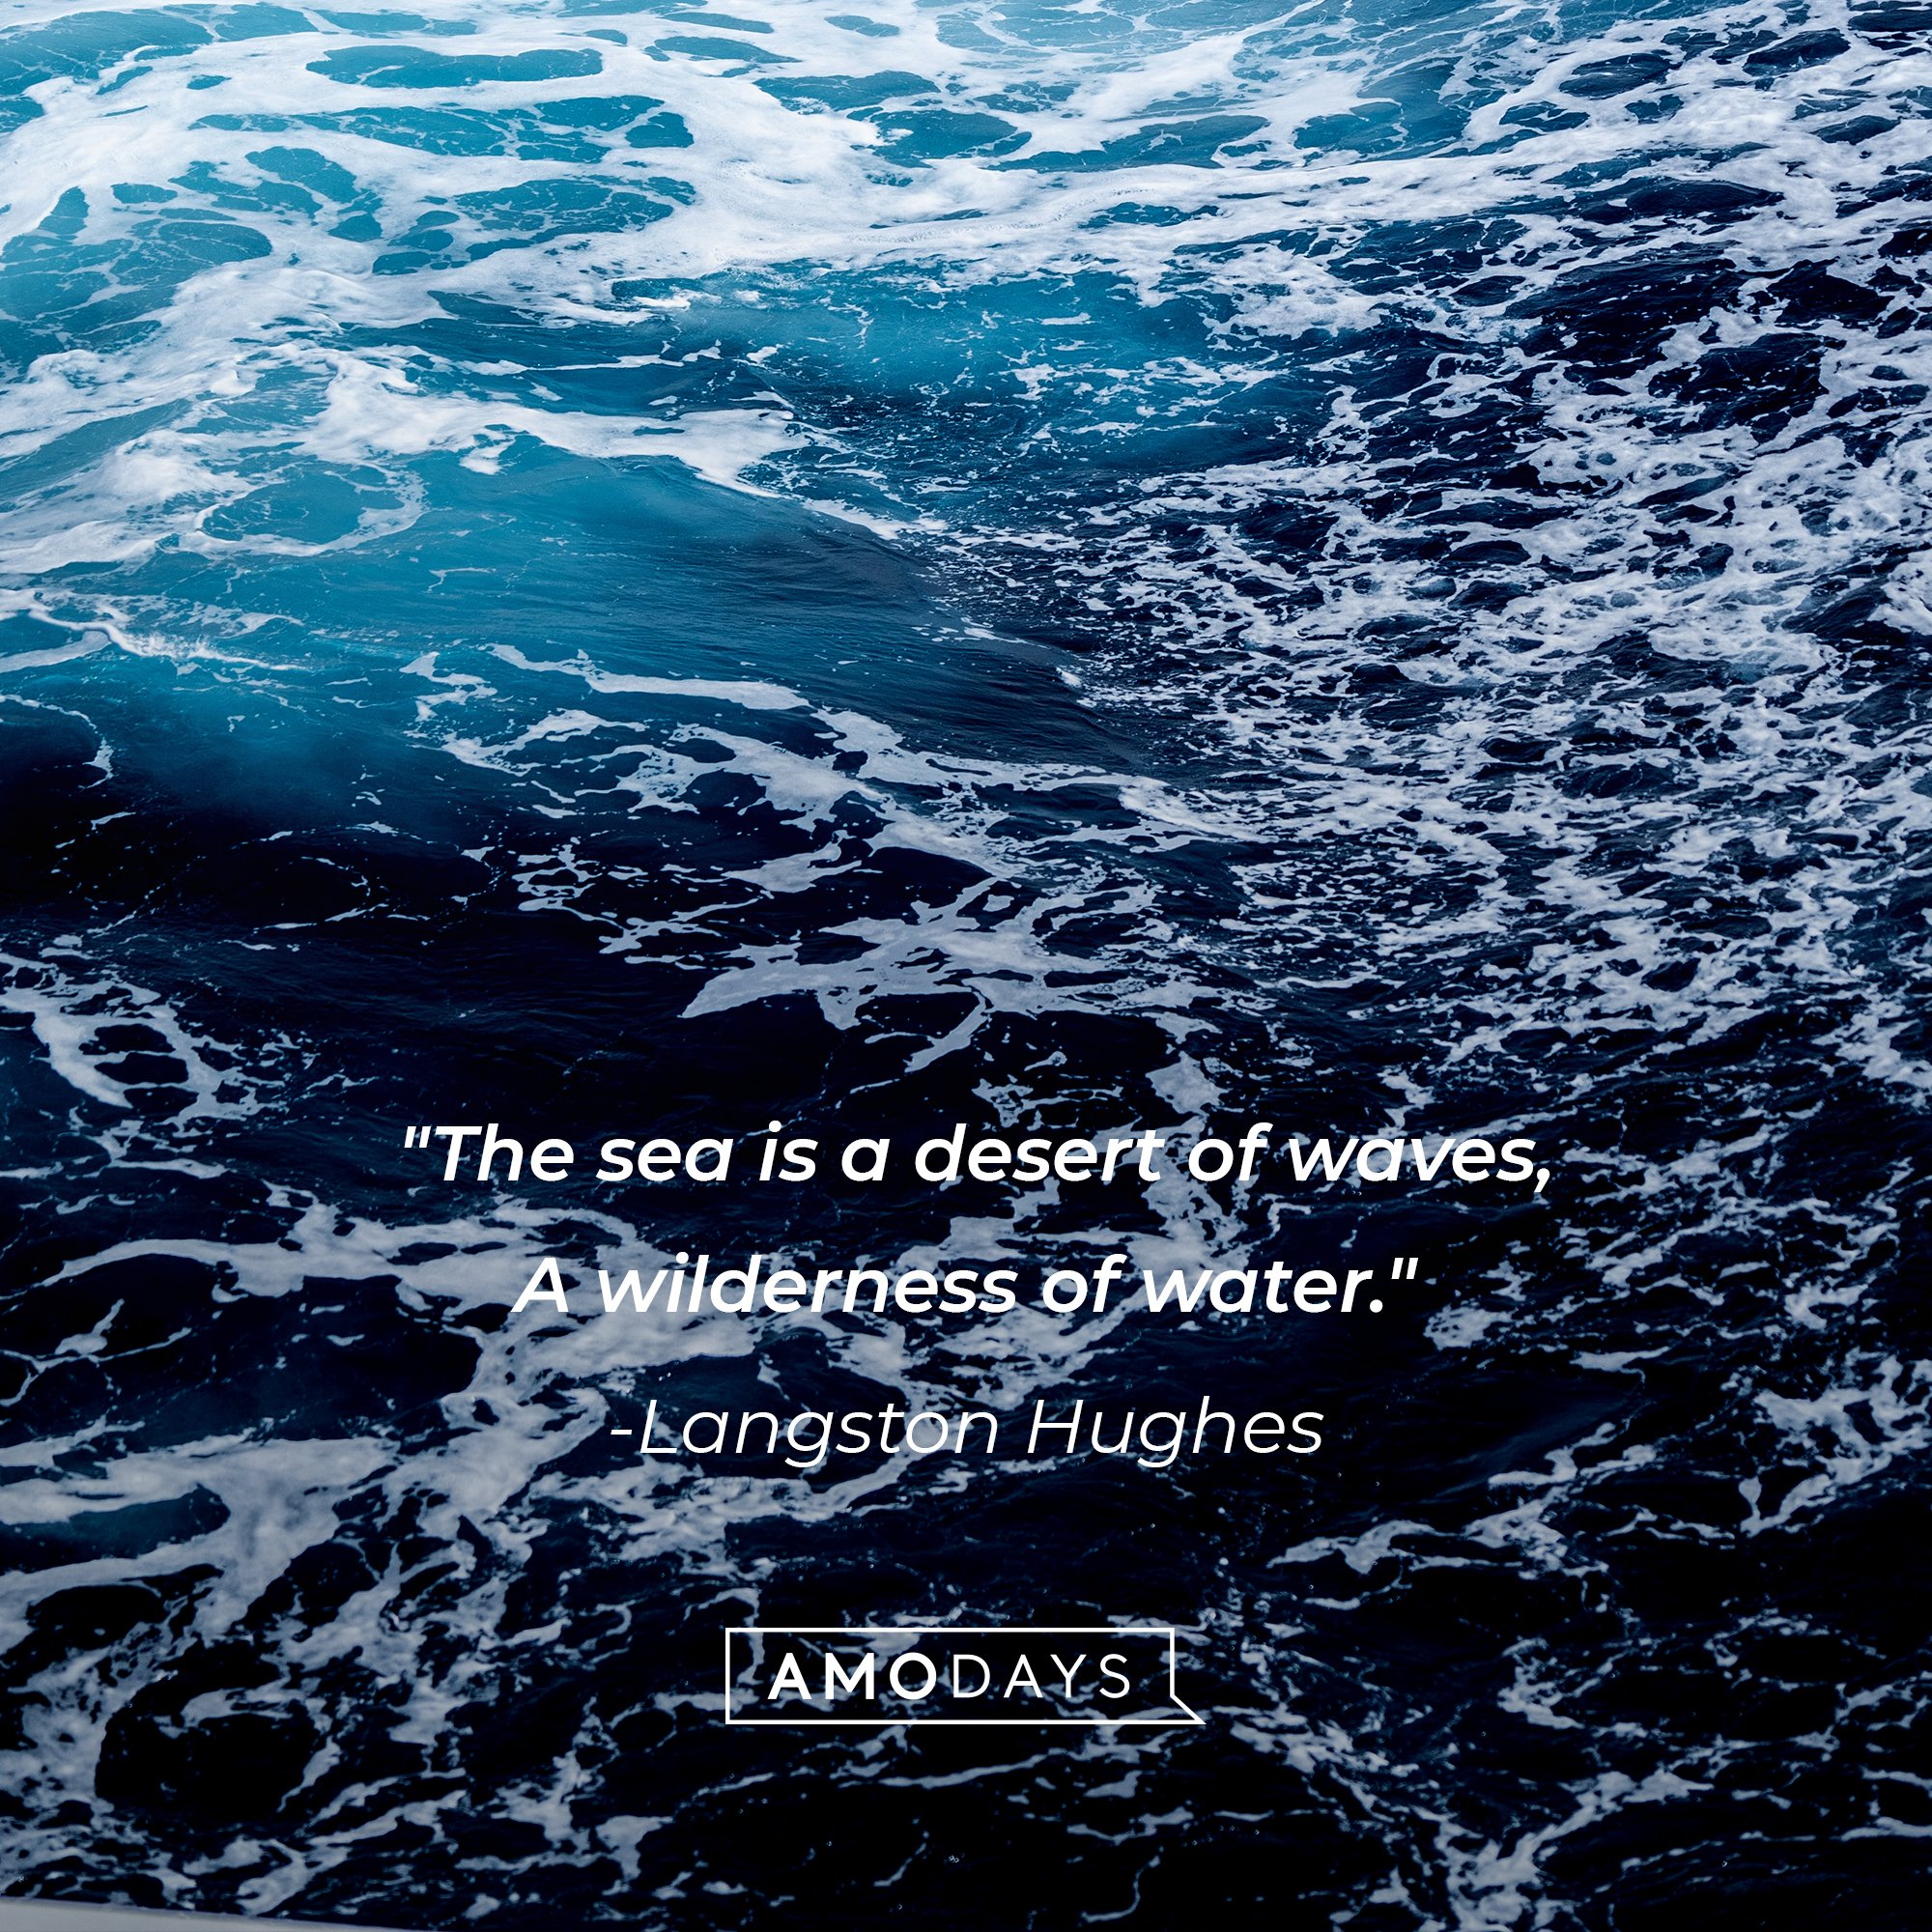 Langston Hughes’s quote: "The sea is a desert of waves, A wilderness of water." | Image: AmoDays